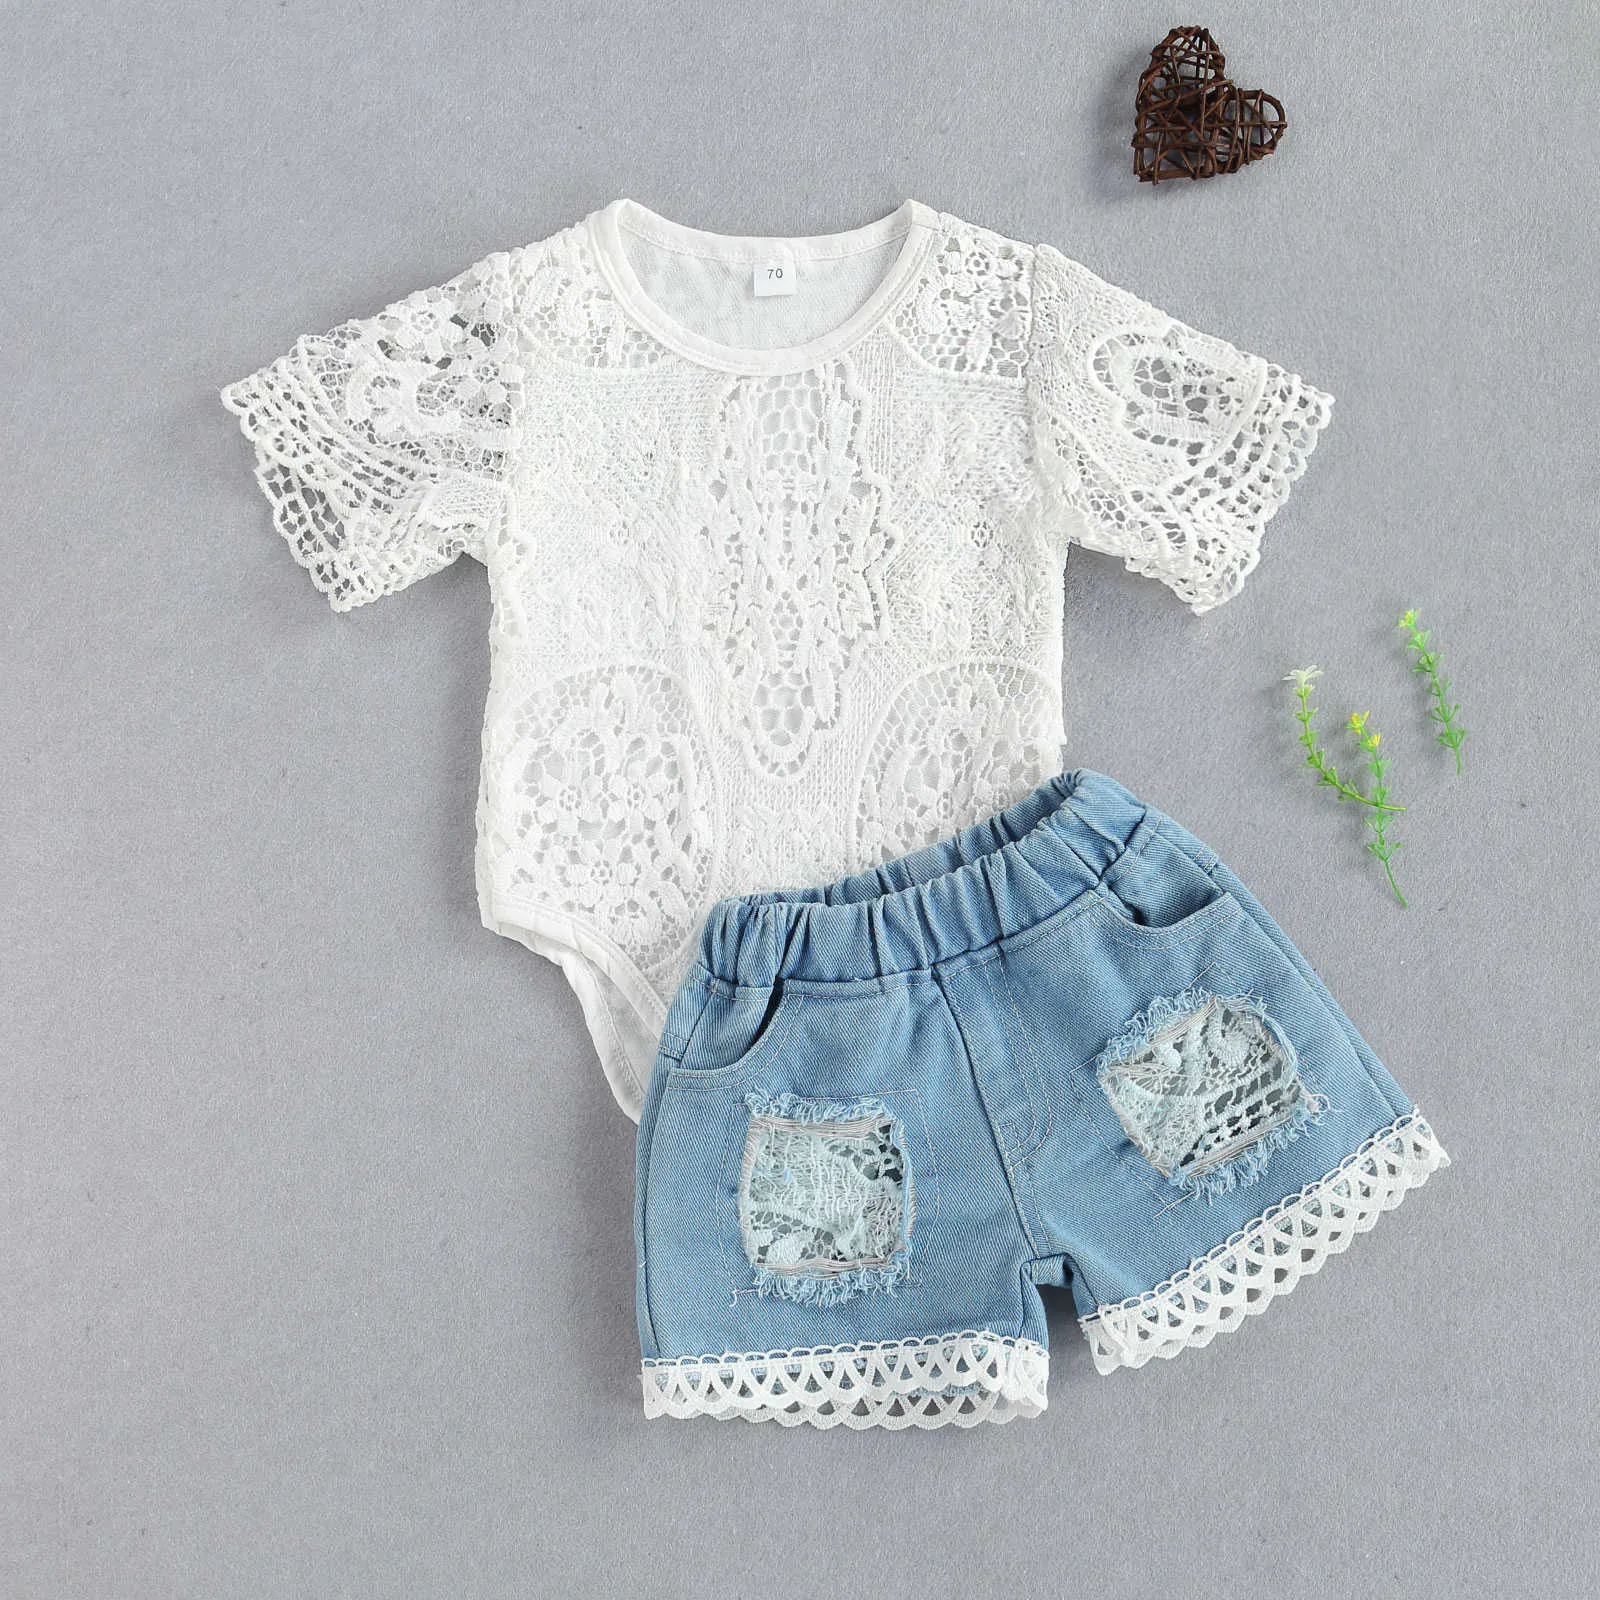 Clothing Sets Fashion Infant Newborn Baby Girls Summer Clothes Sets White Lace Flowers Bodysuits Top and Elastic Denim Shorts 2PCs Outfits